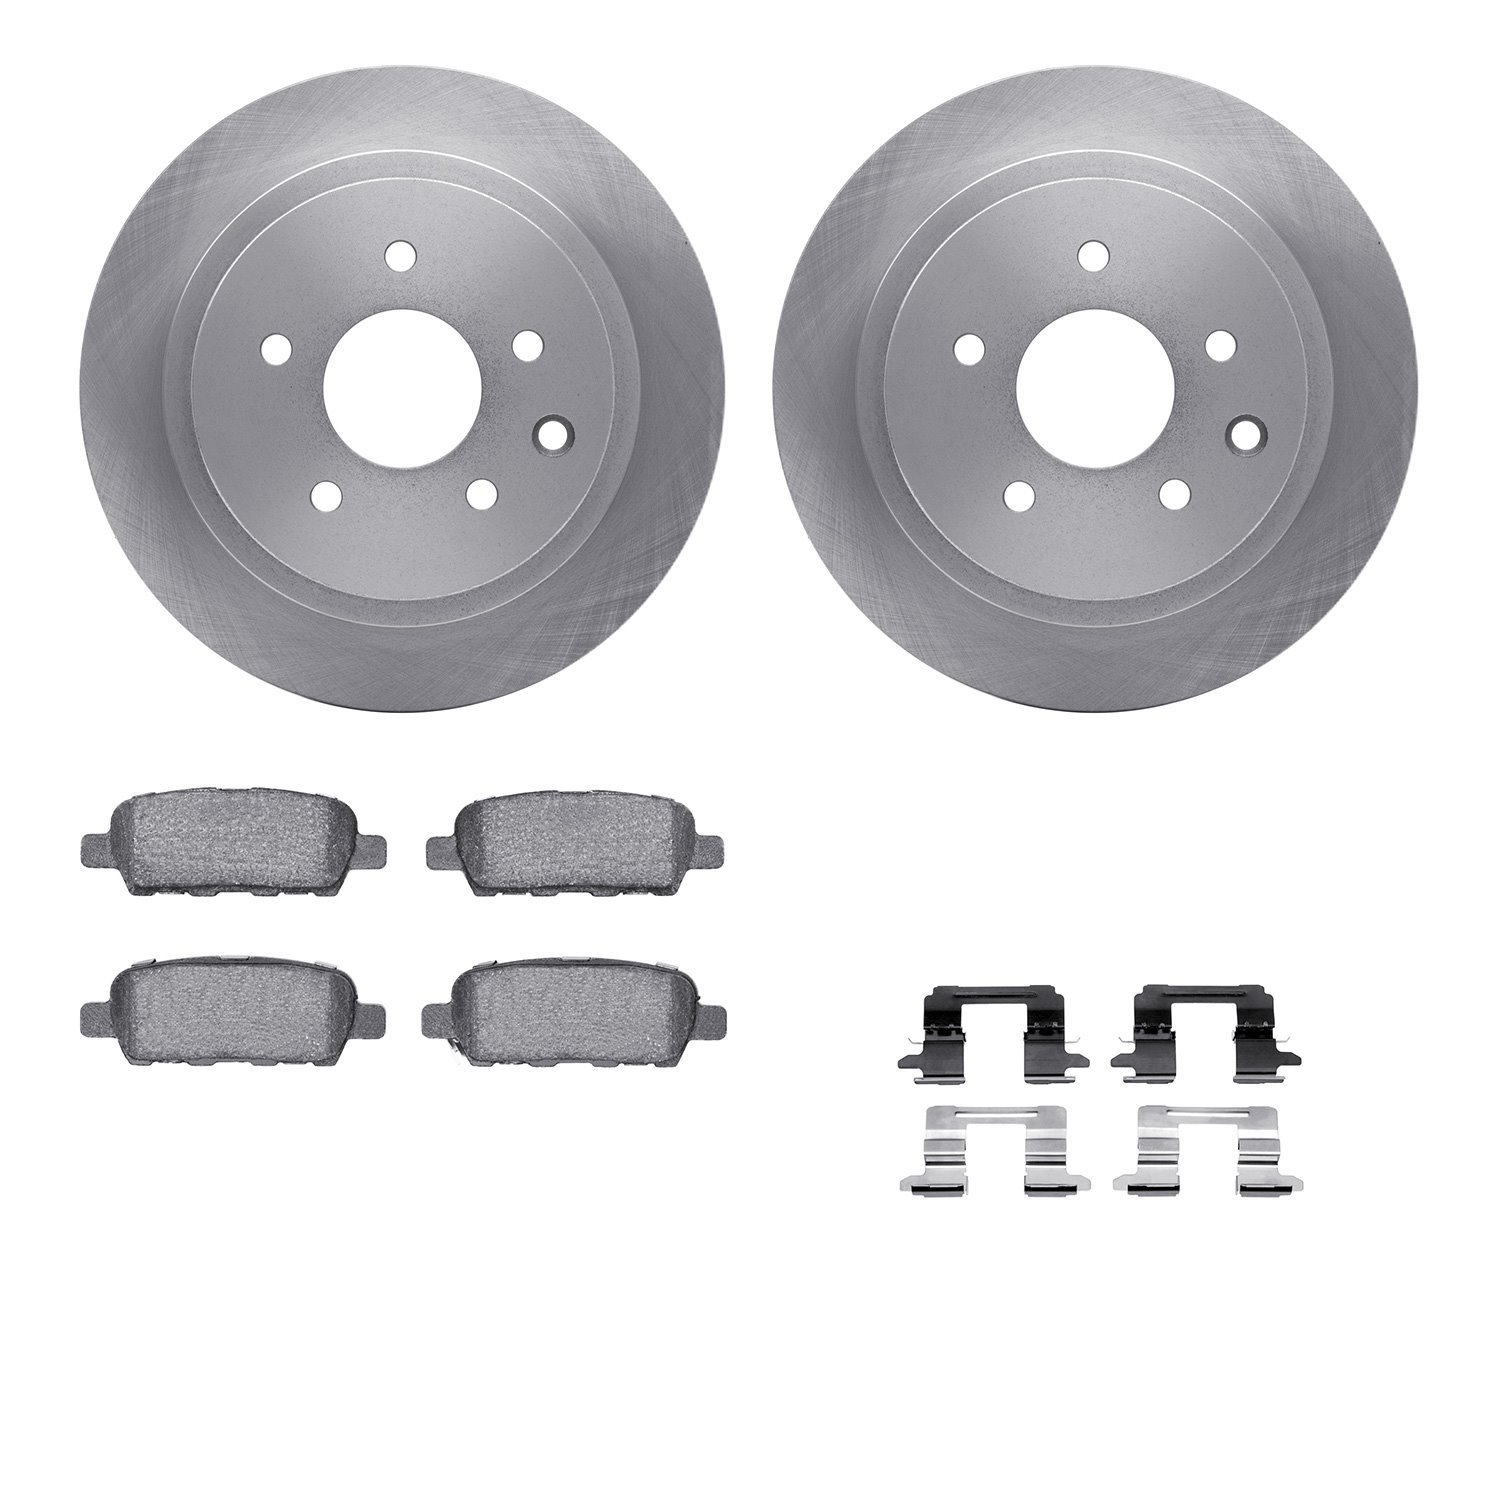 6312-67101 Brake Rotors with 3000-Series Ceramic Brake Pads Kit with Hardware, Fits Select Multiple Makes/Models, Position: Rear